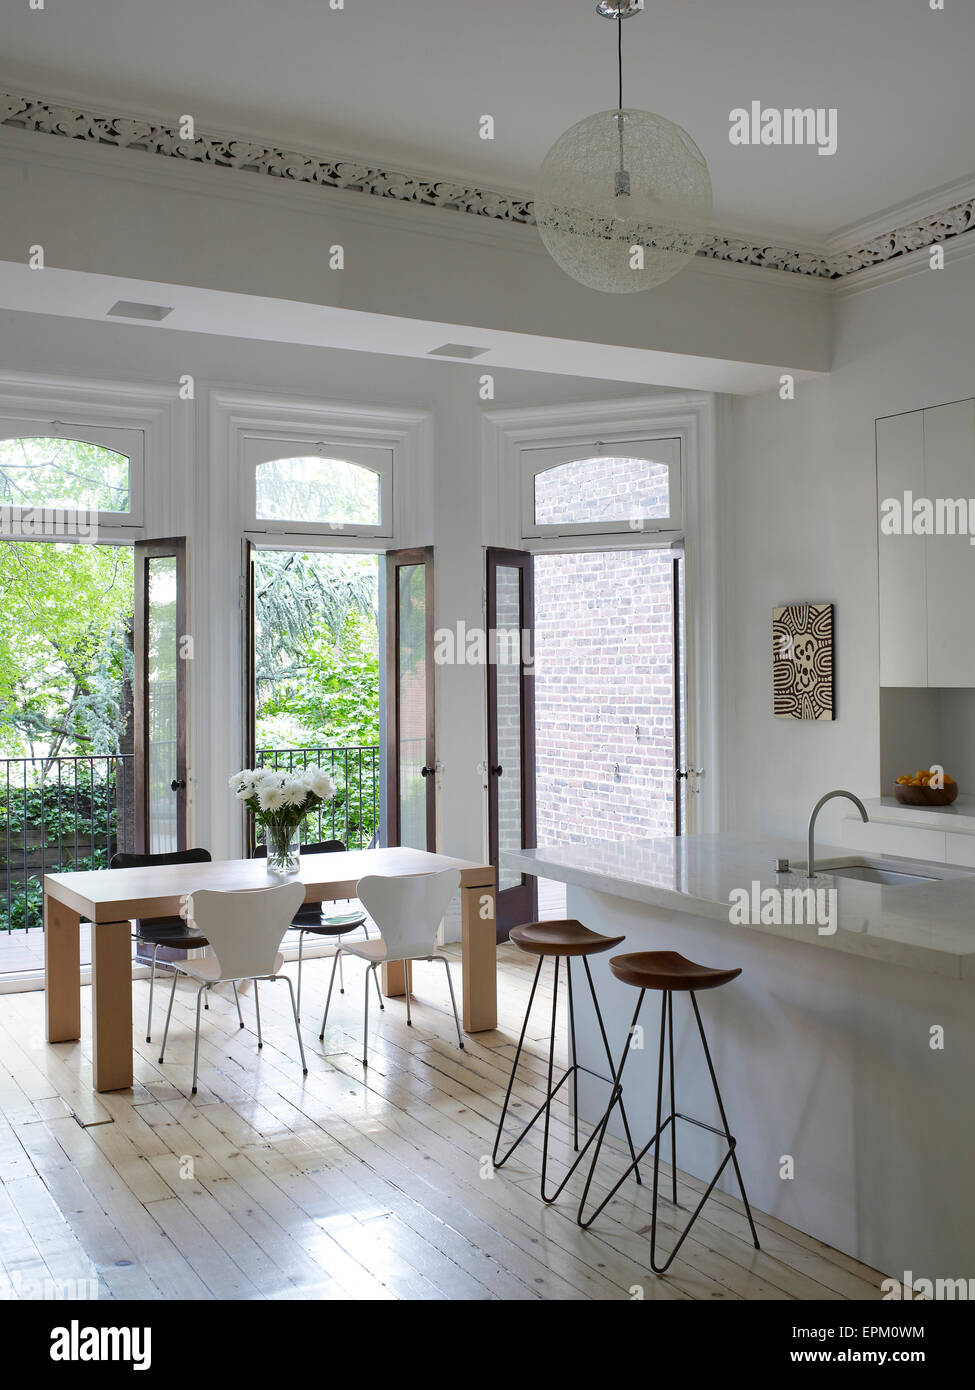 Breakfast bar, stools and small dining table in white kitchen with open glass doors leading to garden, Chelsea Townhouse, New York, USA Stock Photo